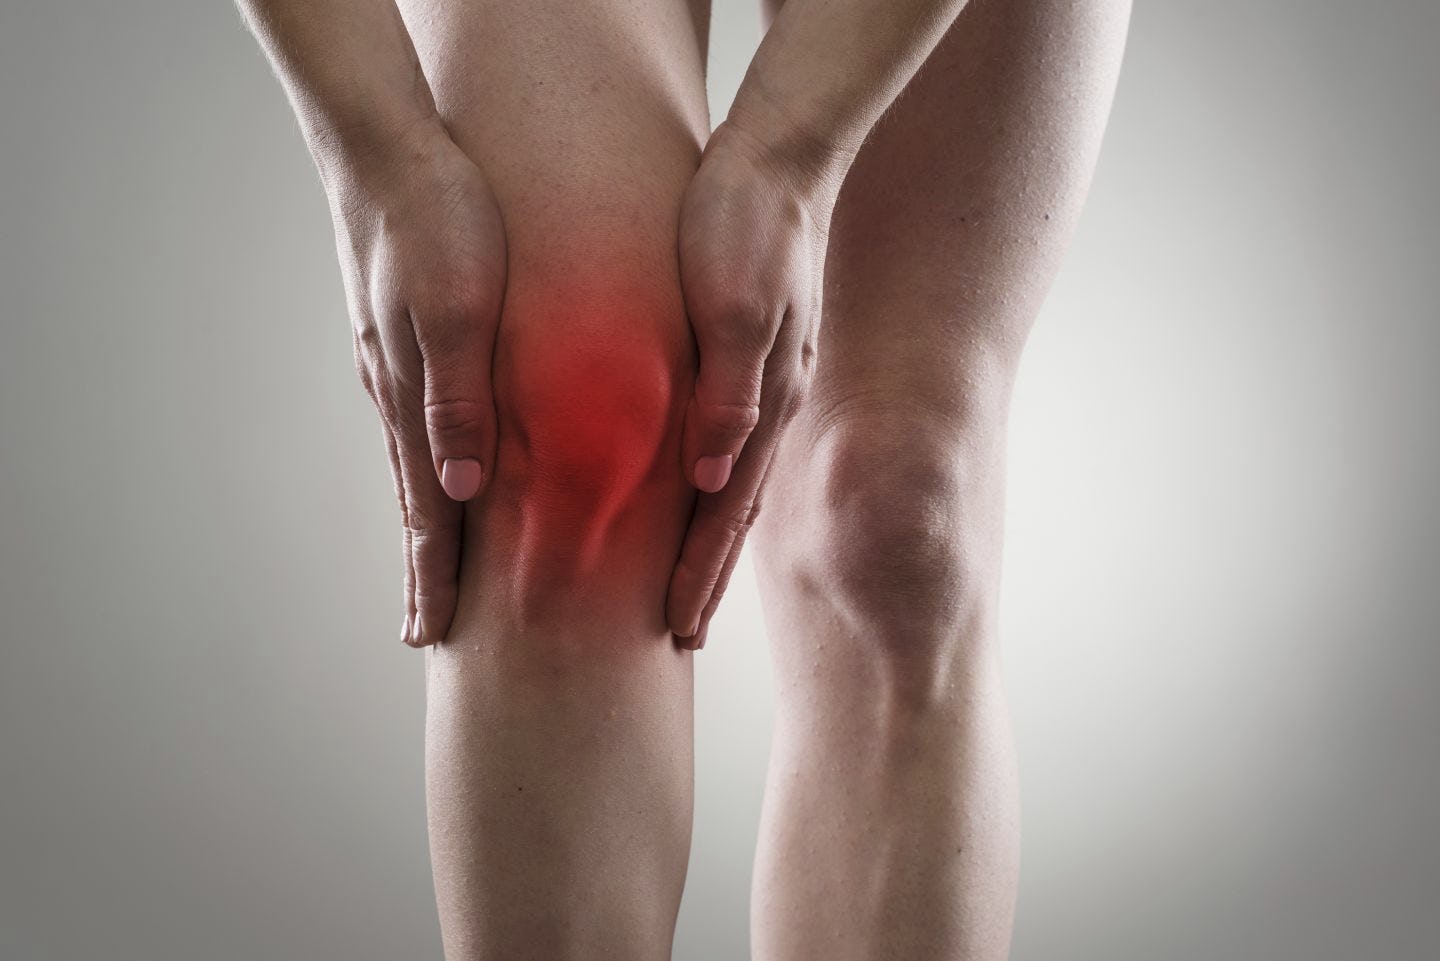 PRO Physical Therapy Knee Pain